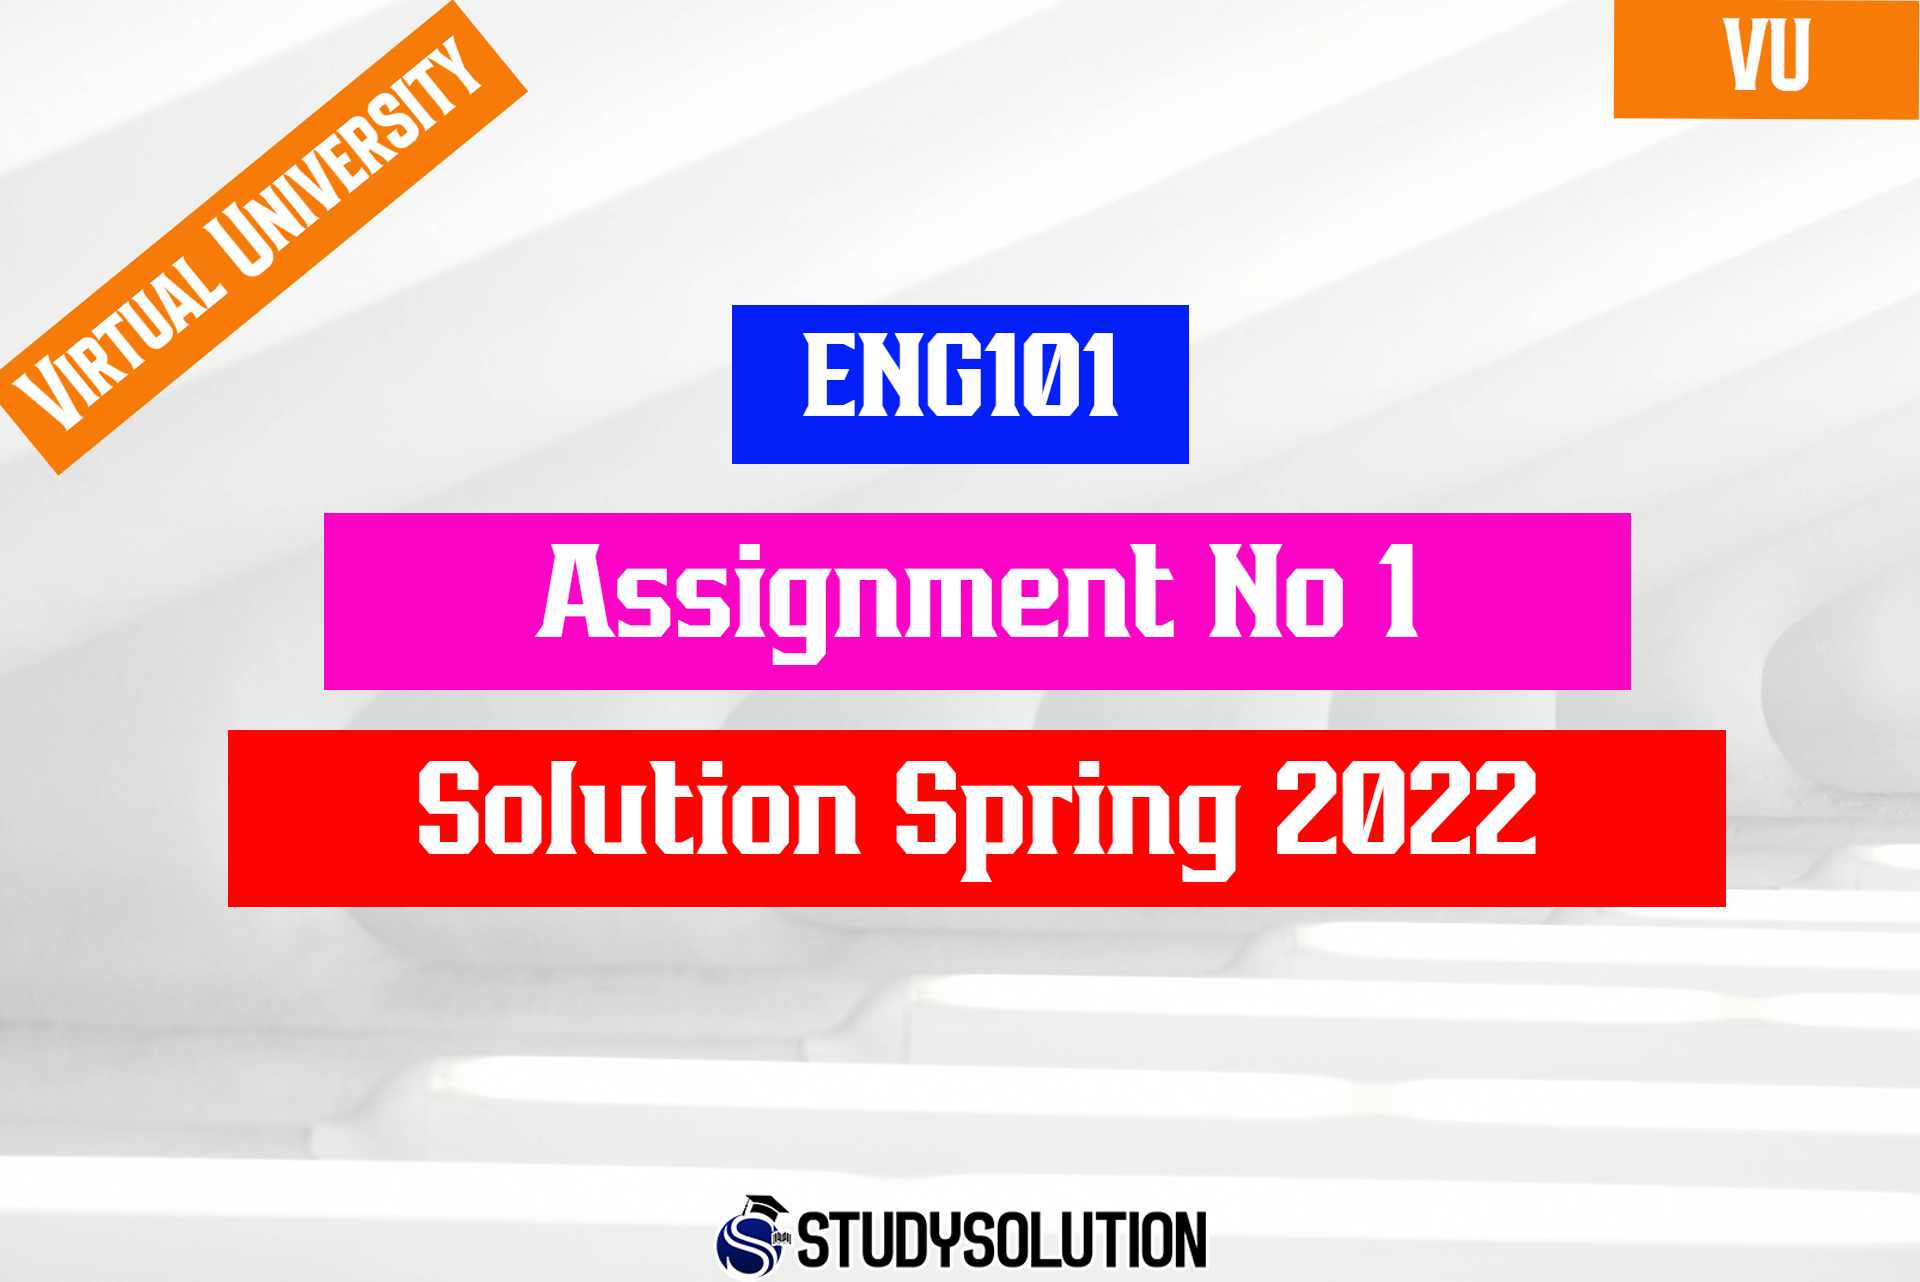 ENG101 Assignment No 1 Solution Spring 2022